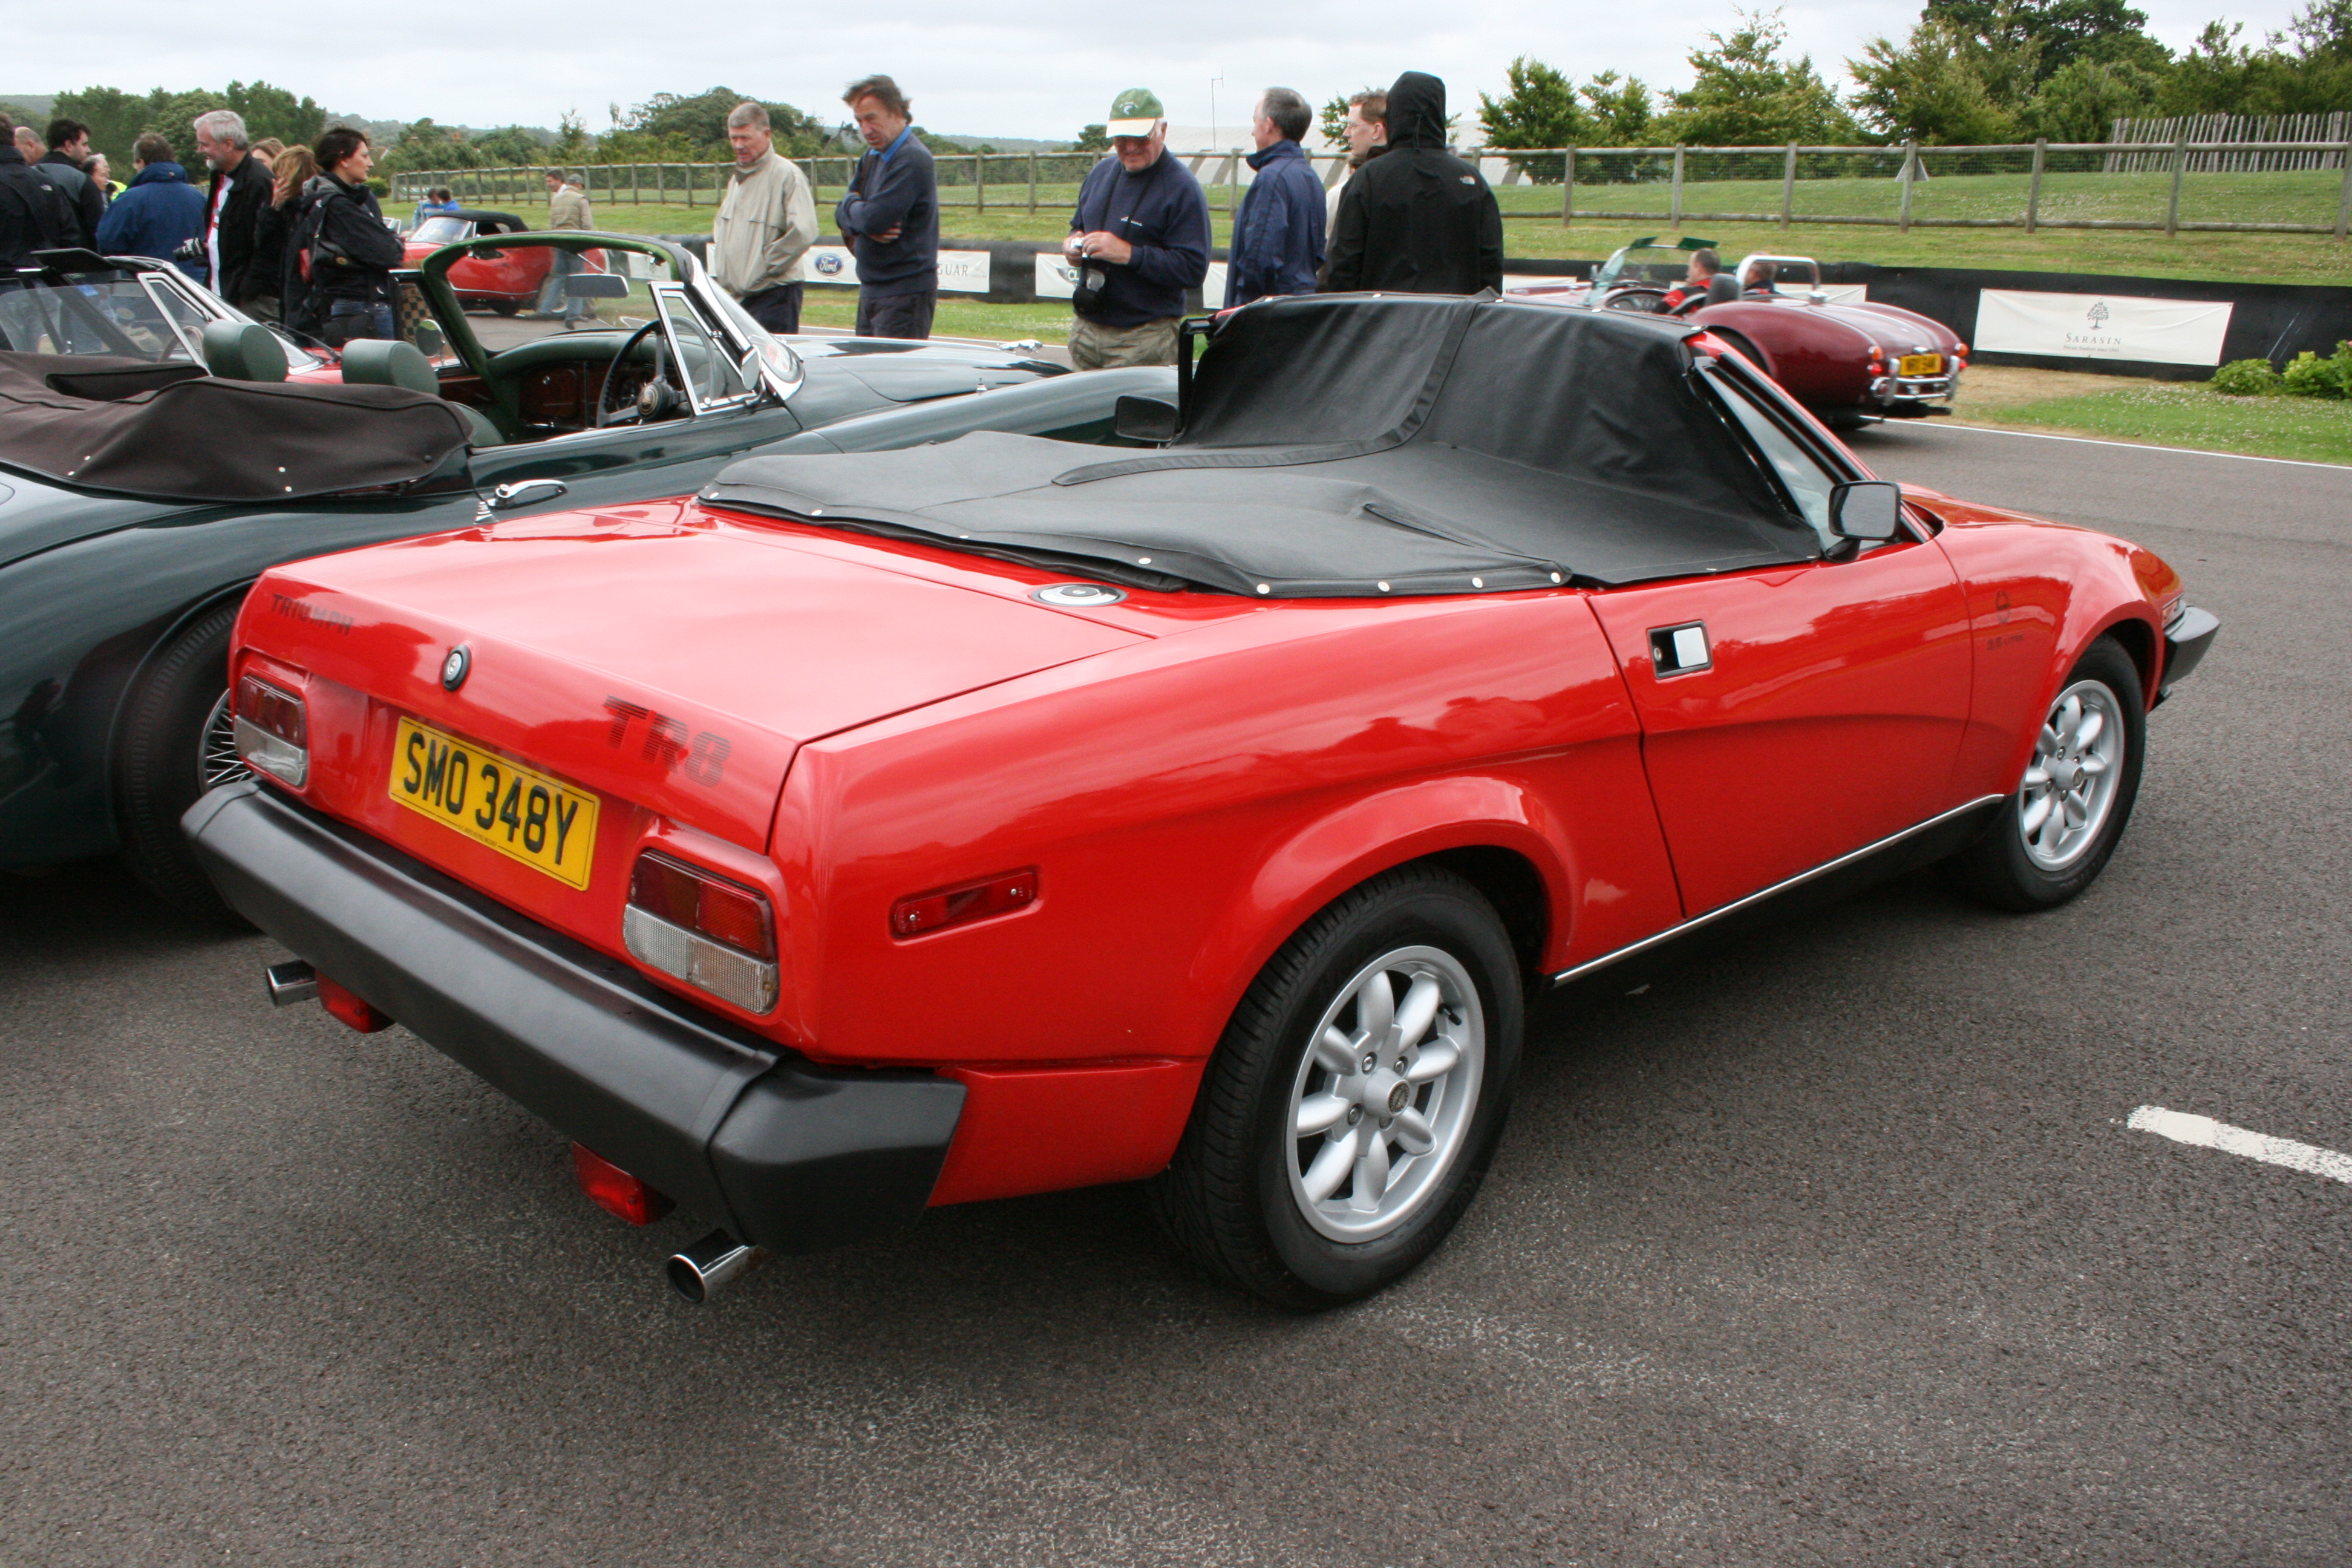 File:Triumph TR8 - Flickr - Supermac1961.jpg - Wikimedia Commons